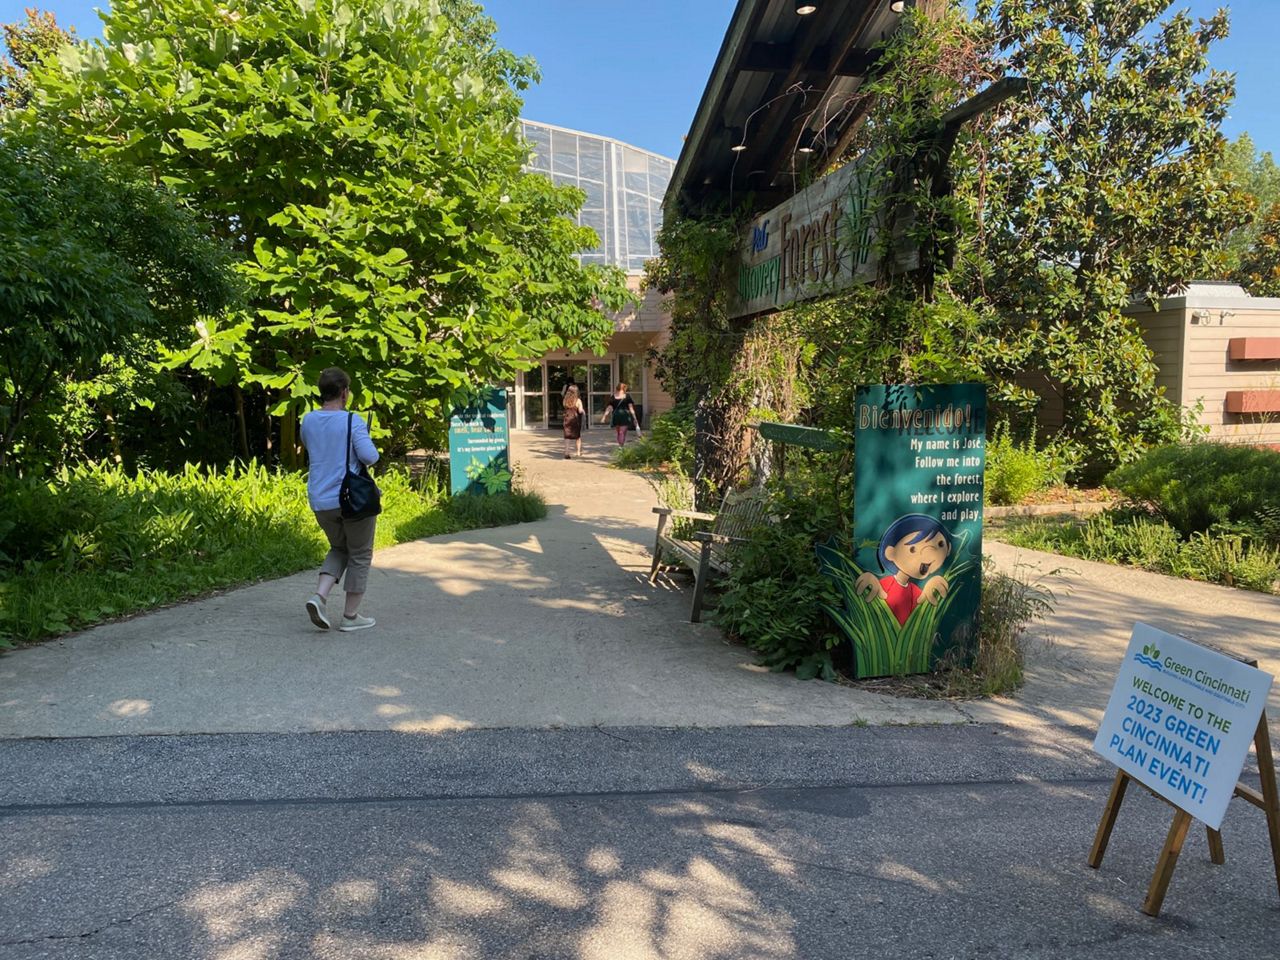 The education at the Cincinnati Zoo and Botanical Garden, where the first meeting of the 2023 Green Cincinnati Plan update took place. (Casey Weldon/Spectrum News 1)